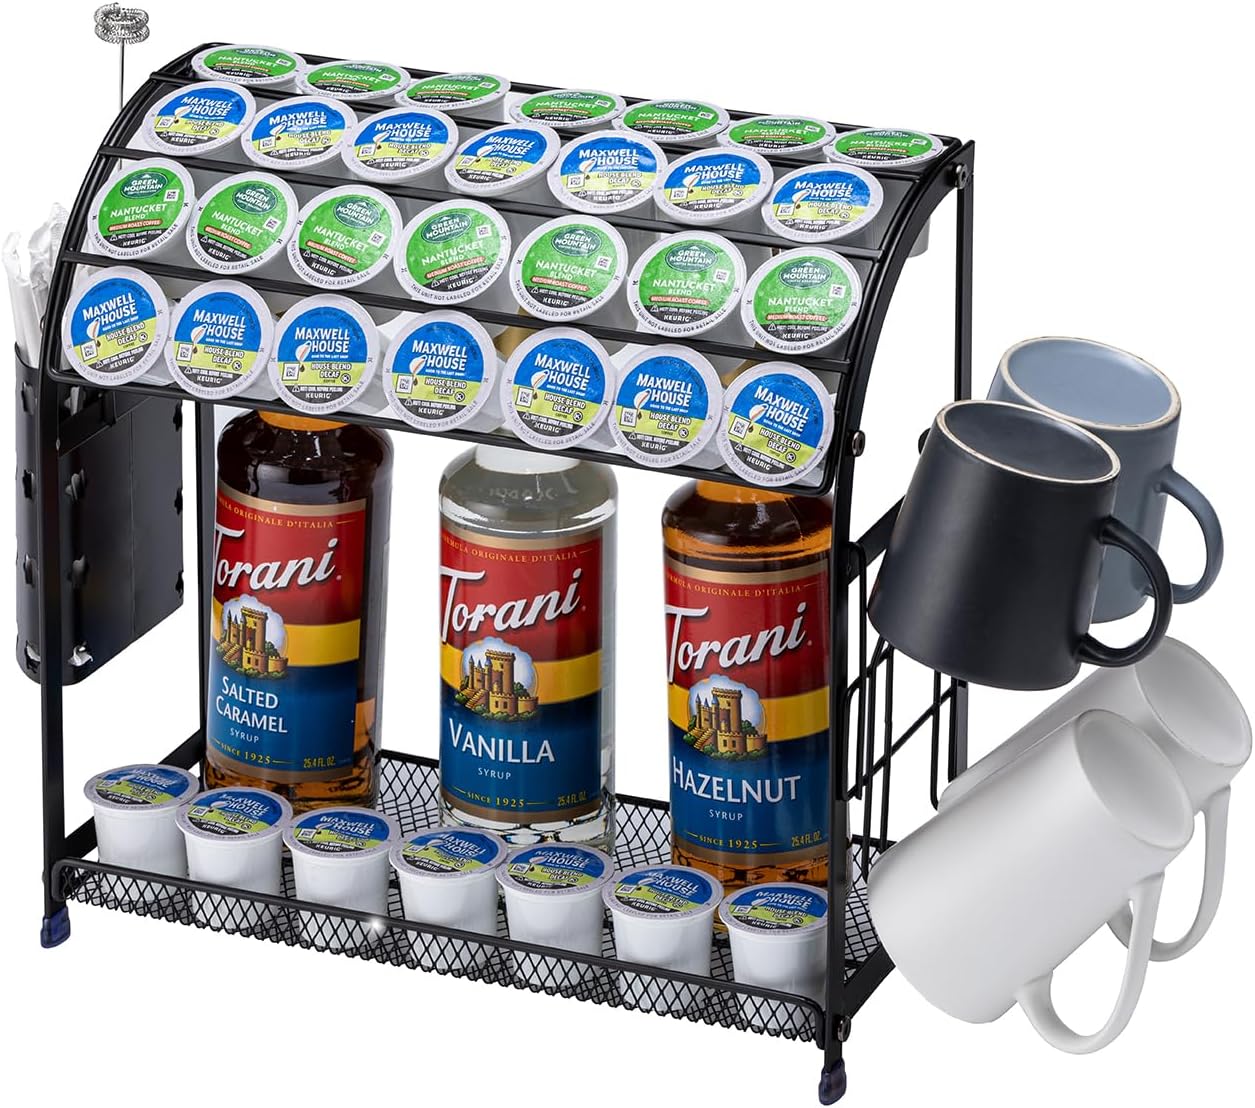 FlagShip K Cup Holder Coffee Pod Holder K Cup Organizer for Coffee Bar Save Space for Countertop Kitchen (28 Pods Capacity)